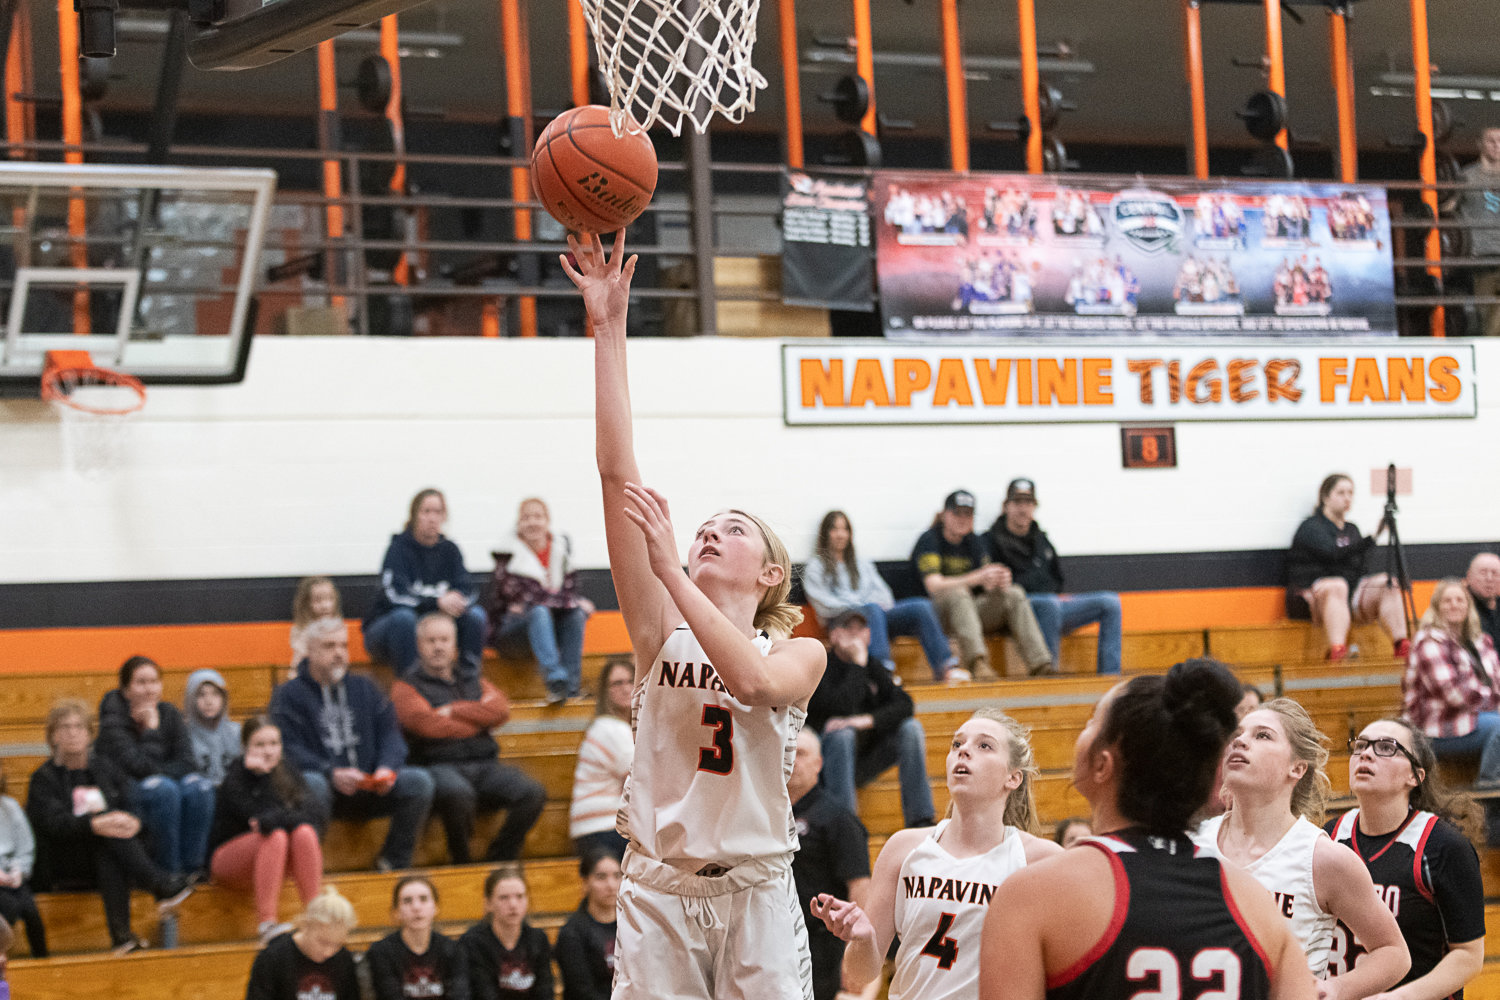 Hayden Kaut puts in two easy points during the first quarter of Napavine's win over Toledo on Dec. 14.